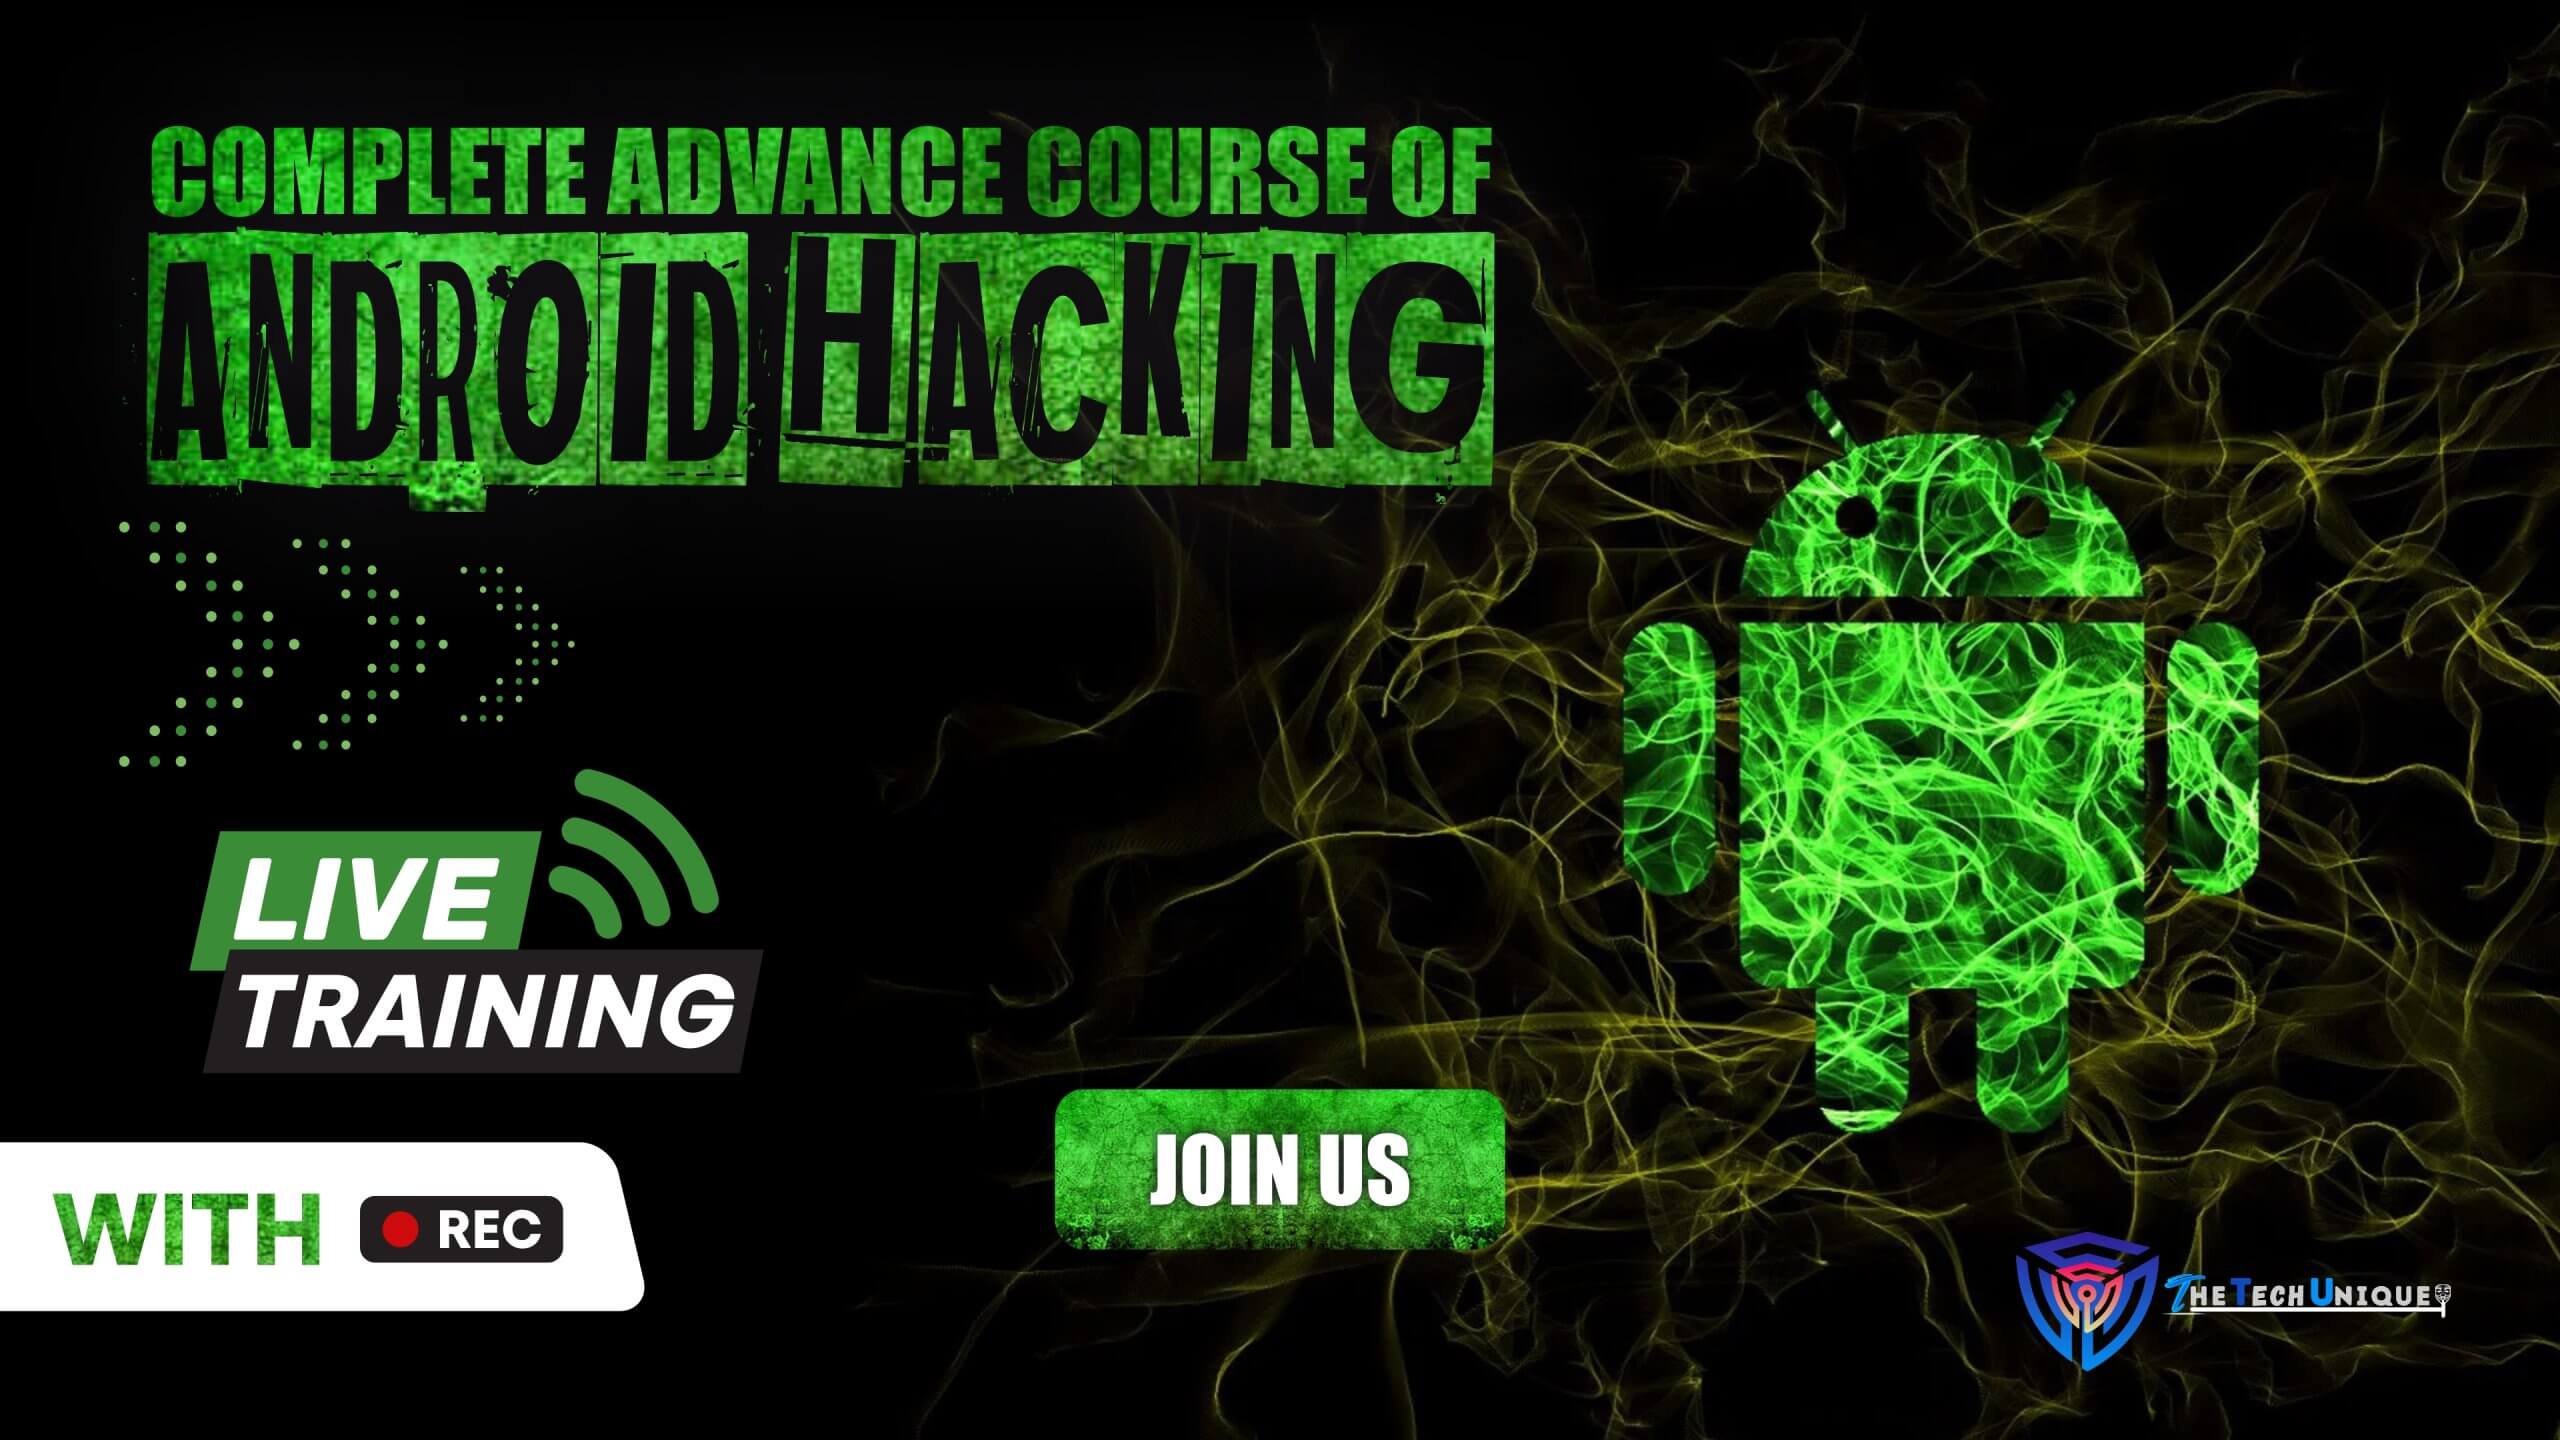 Complete Android Hacking Course